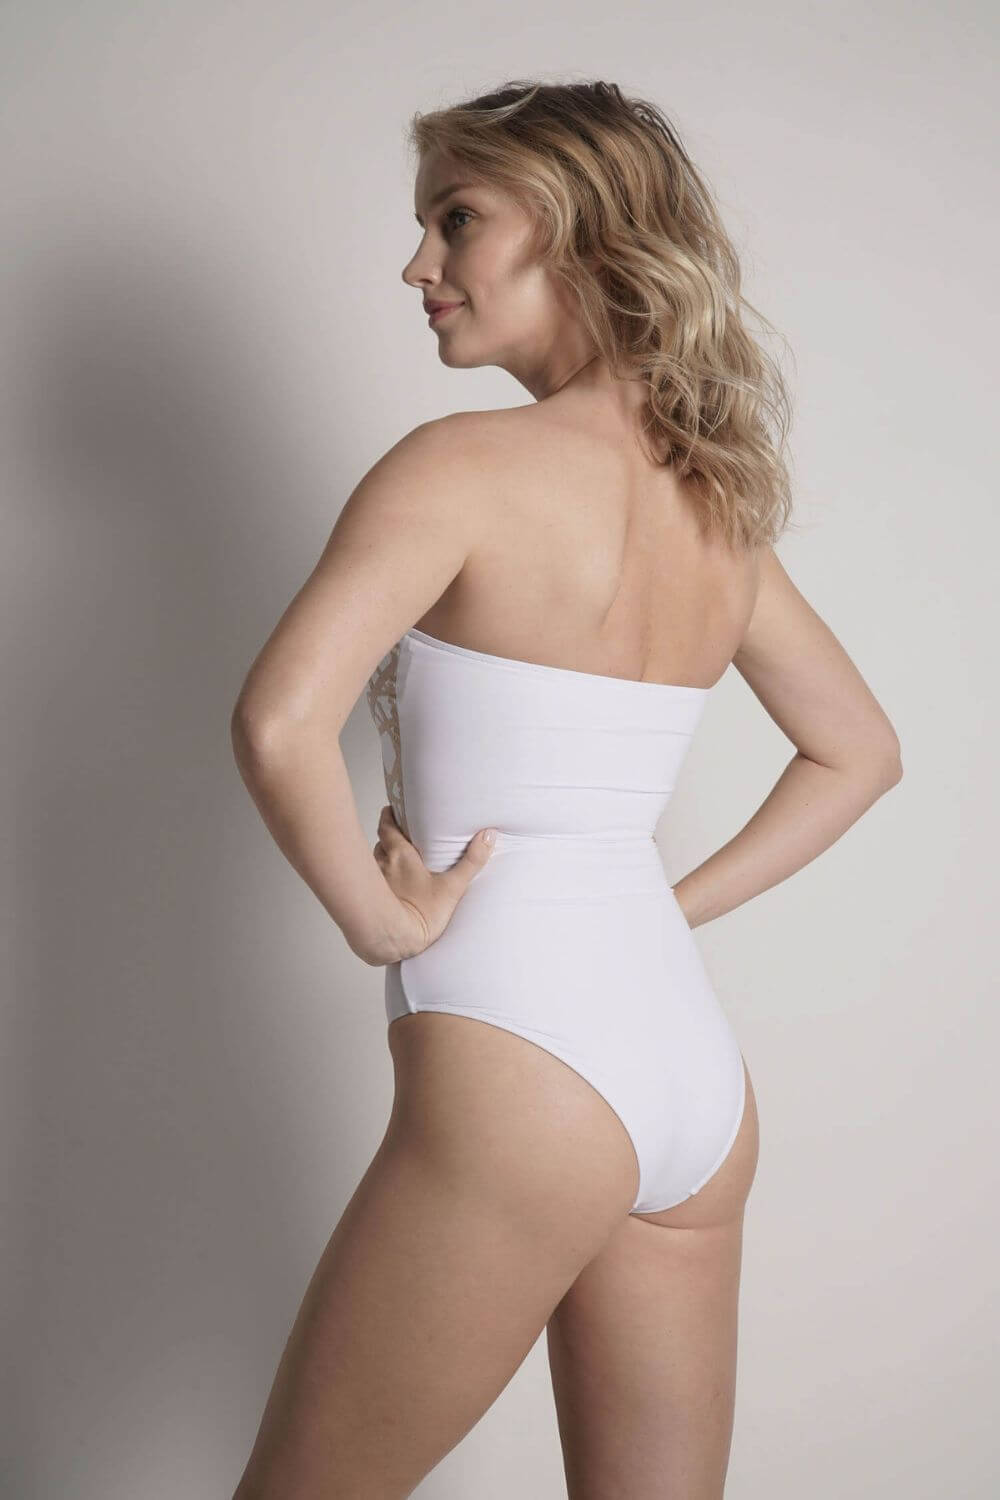 The Angela white bandeau strapless bathing suit offers full coverage on the back.